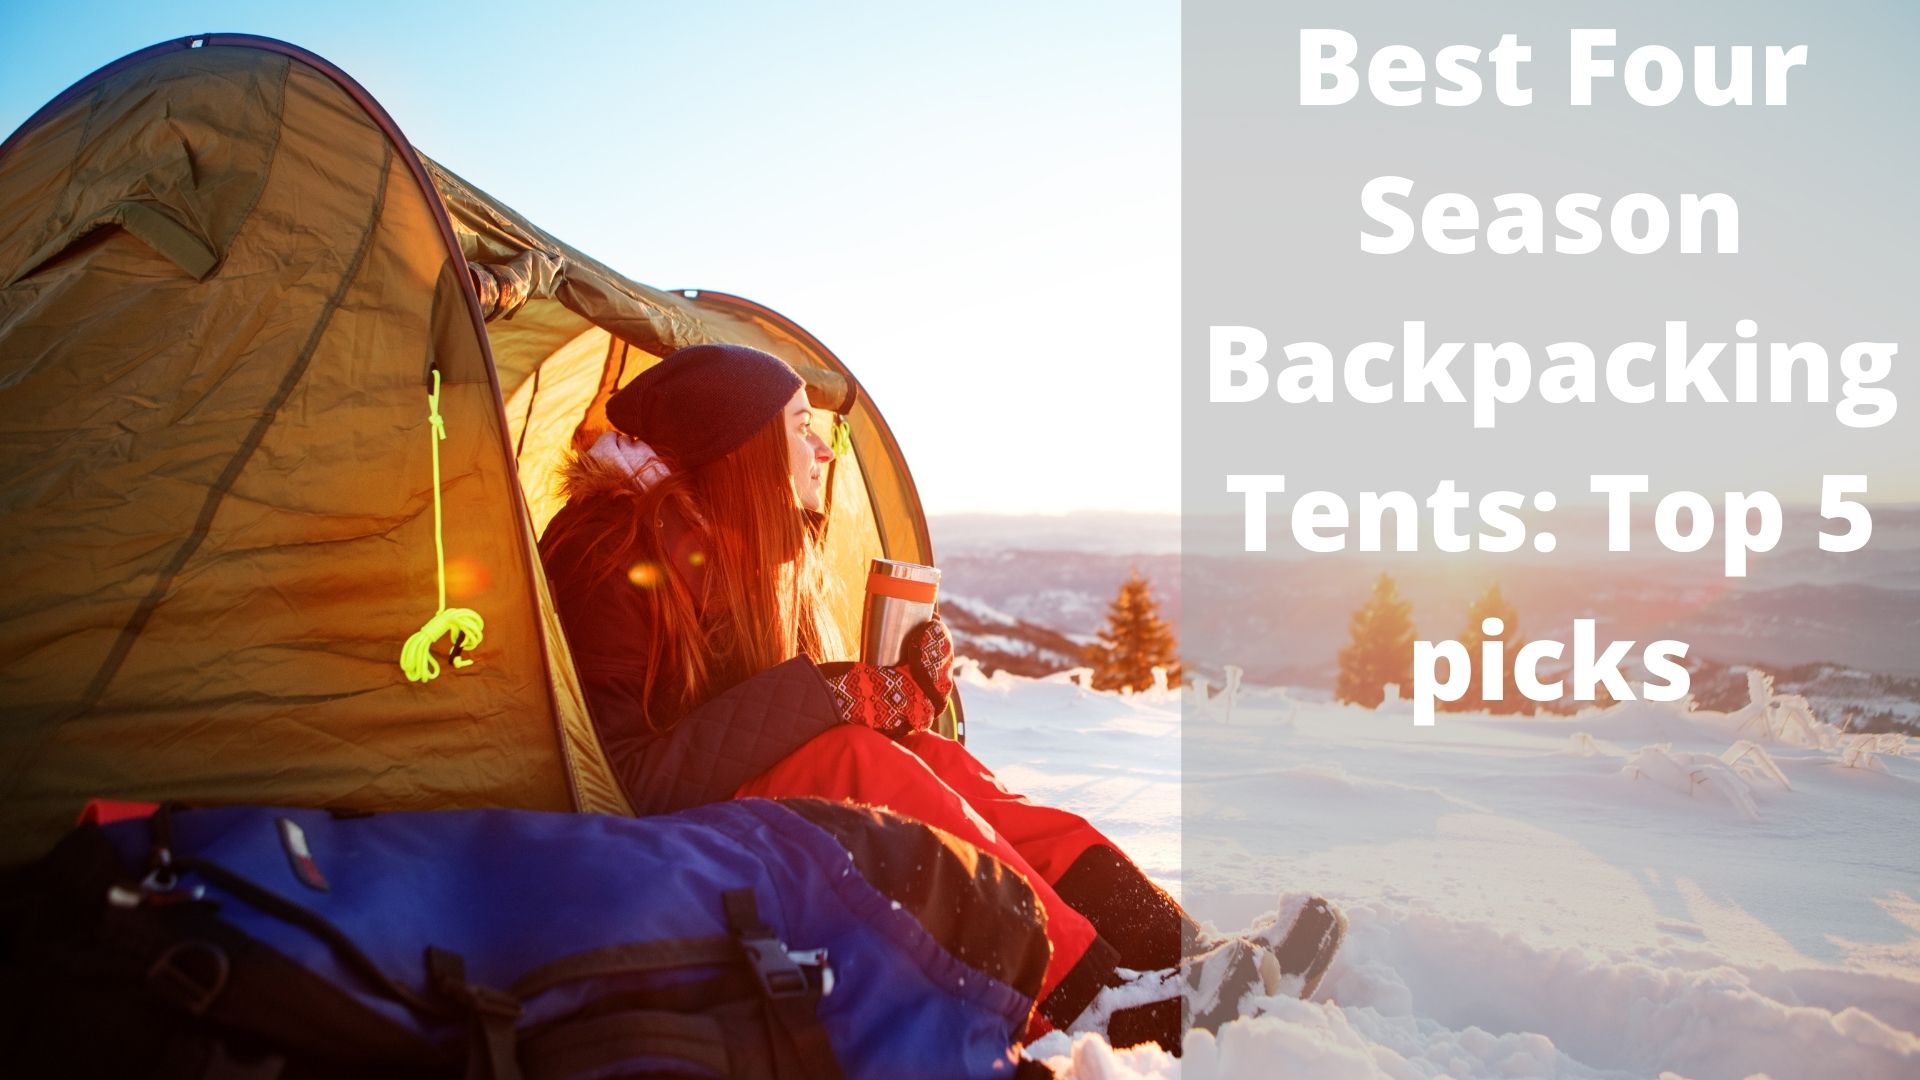 Best Four Season Backpacking Tents - Featured Image